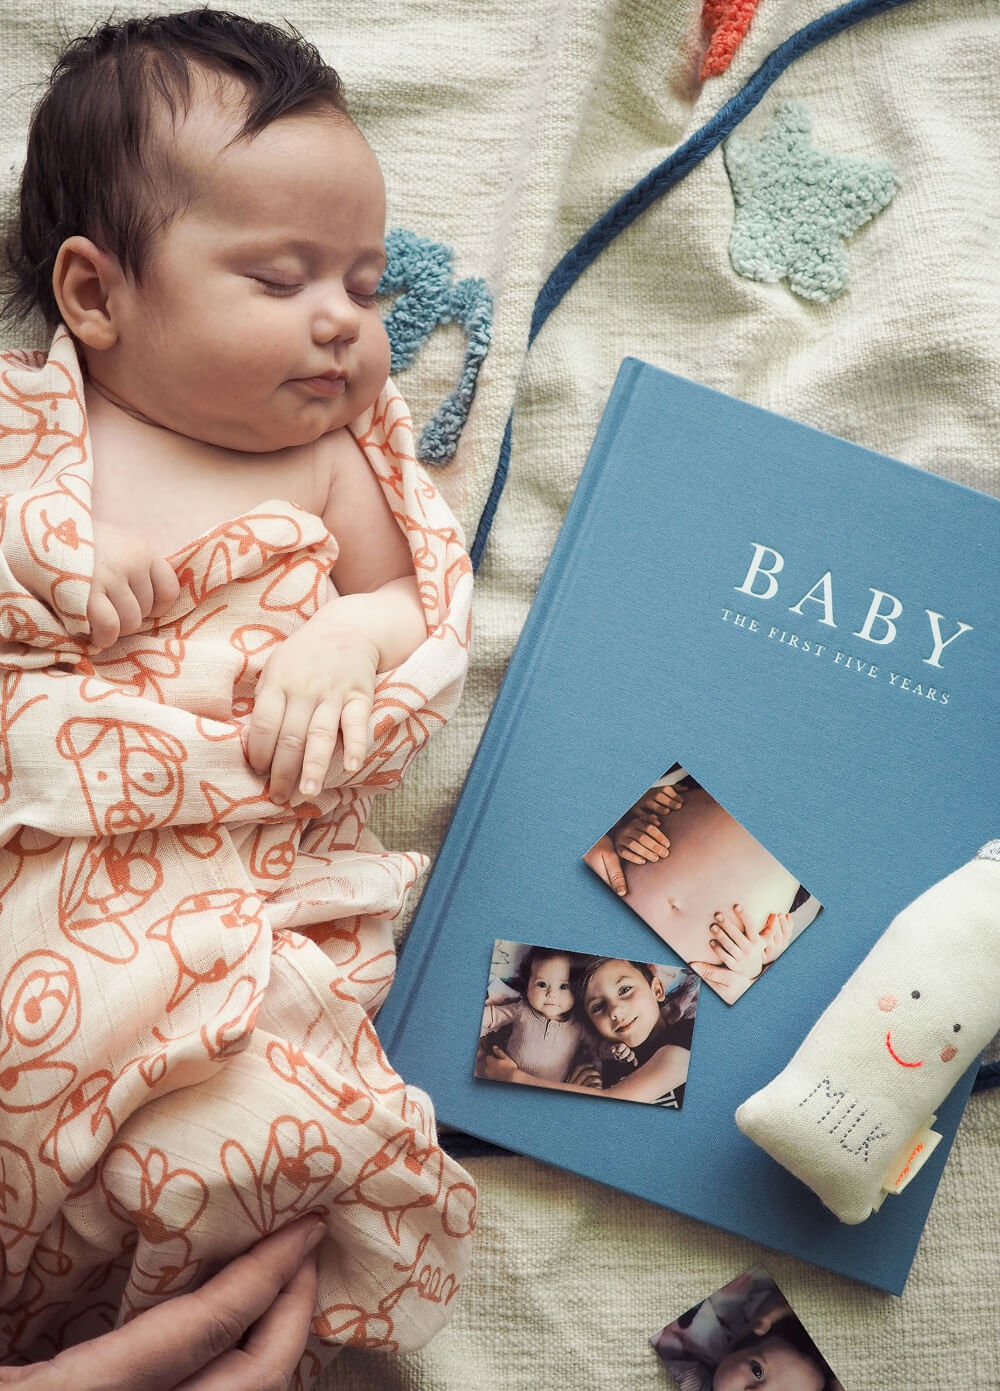 Blue Baby Journal (The First Five Years) by Write to Me | Queen Bee